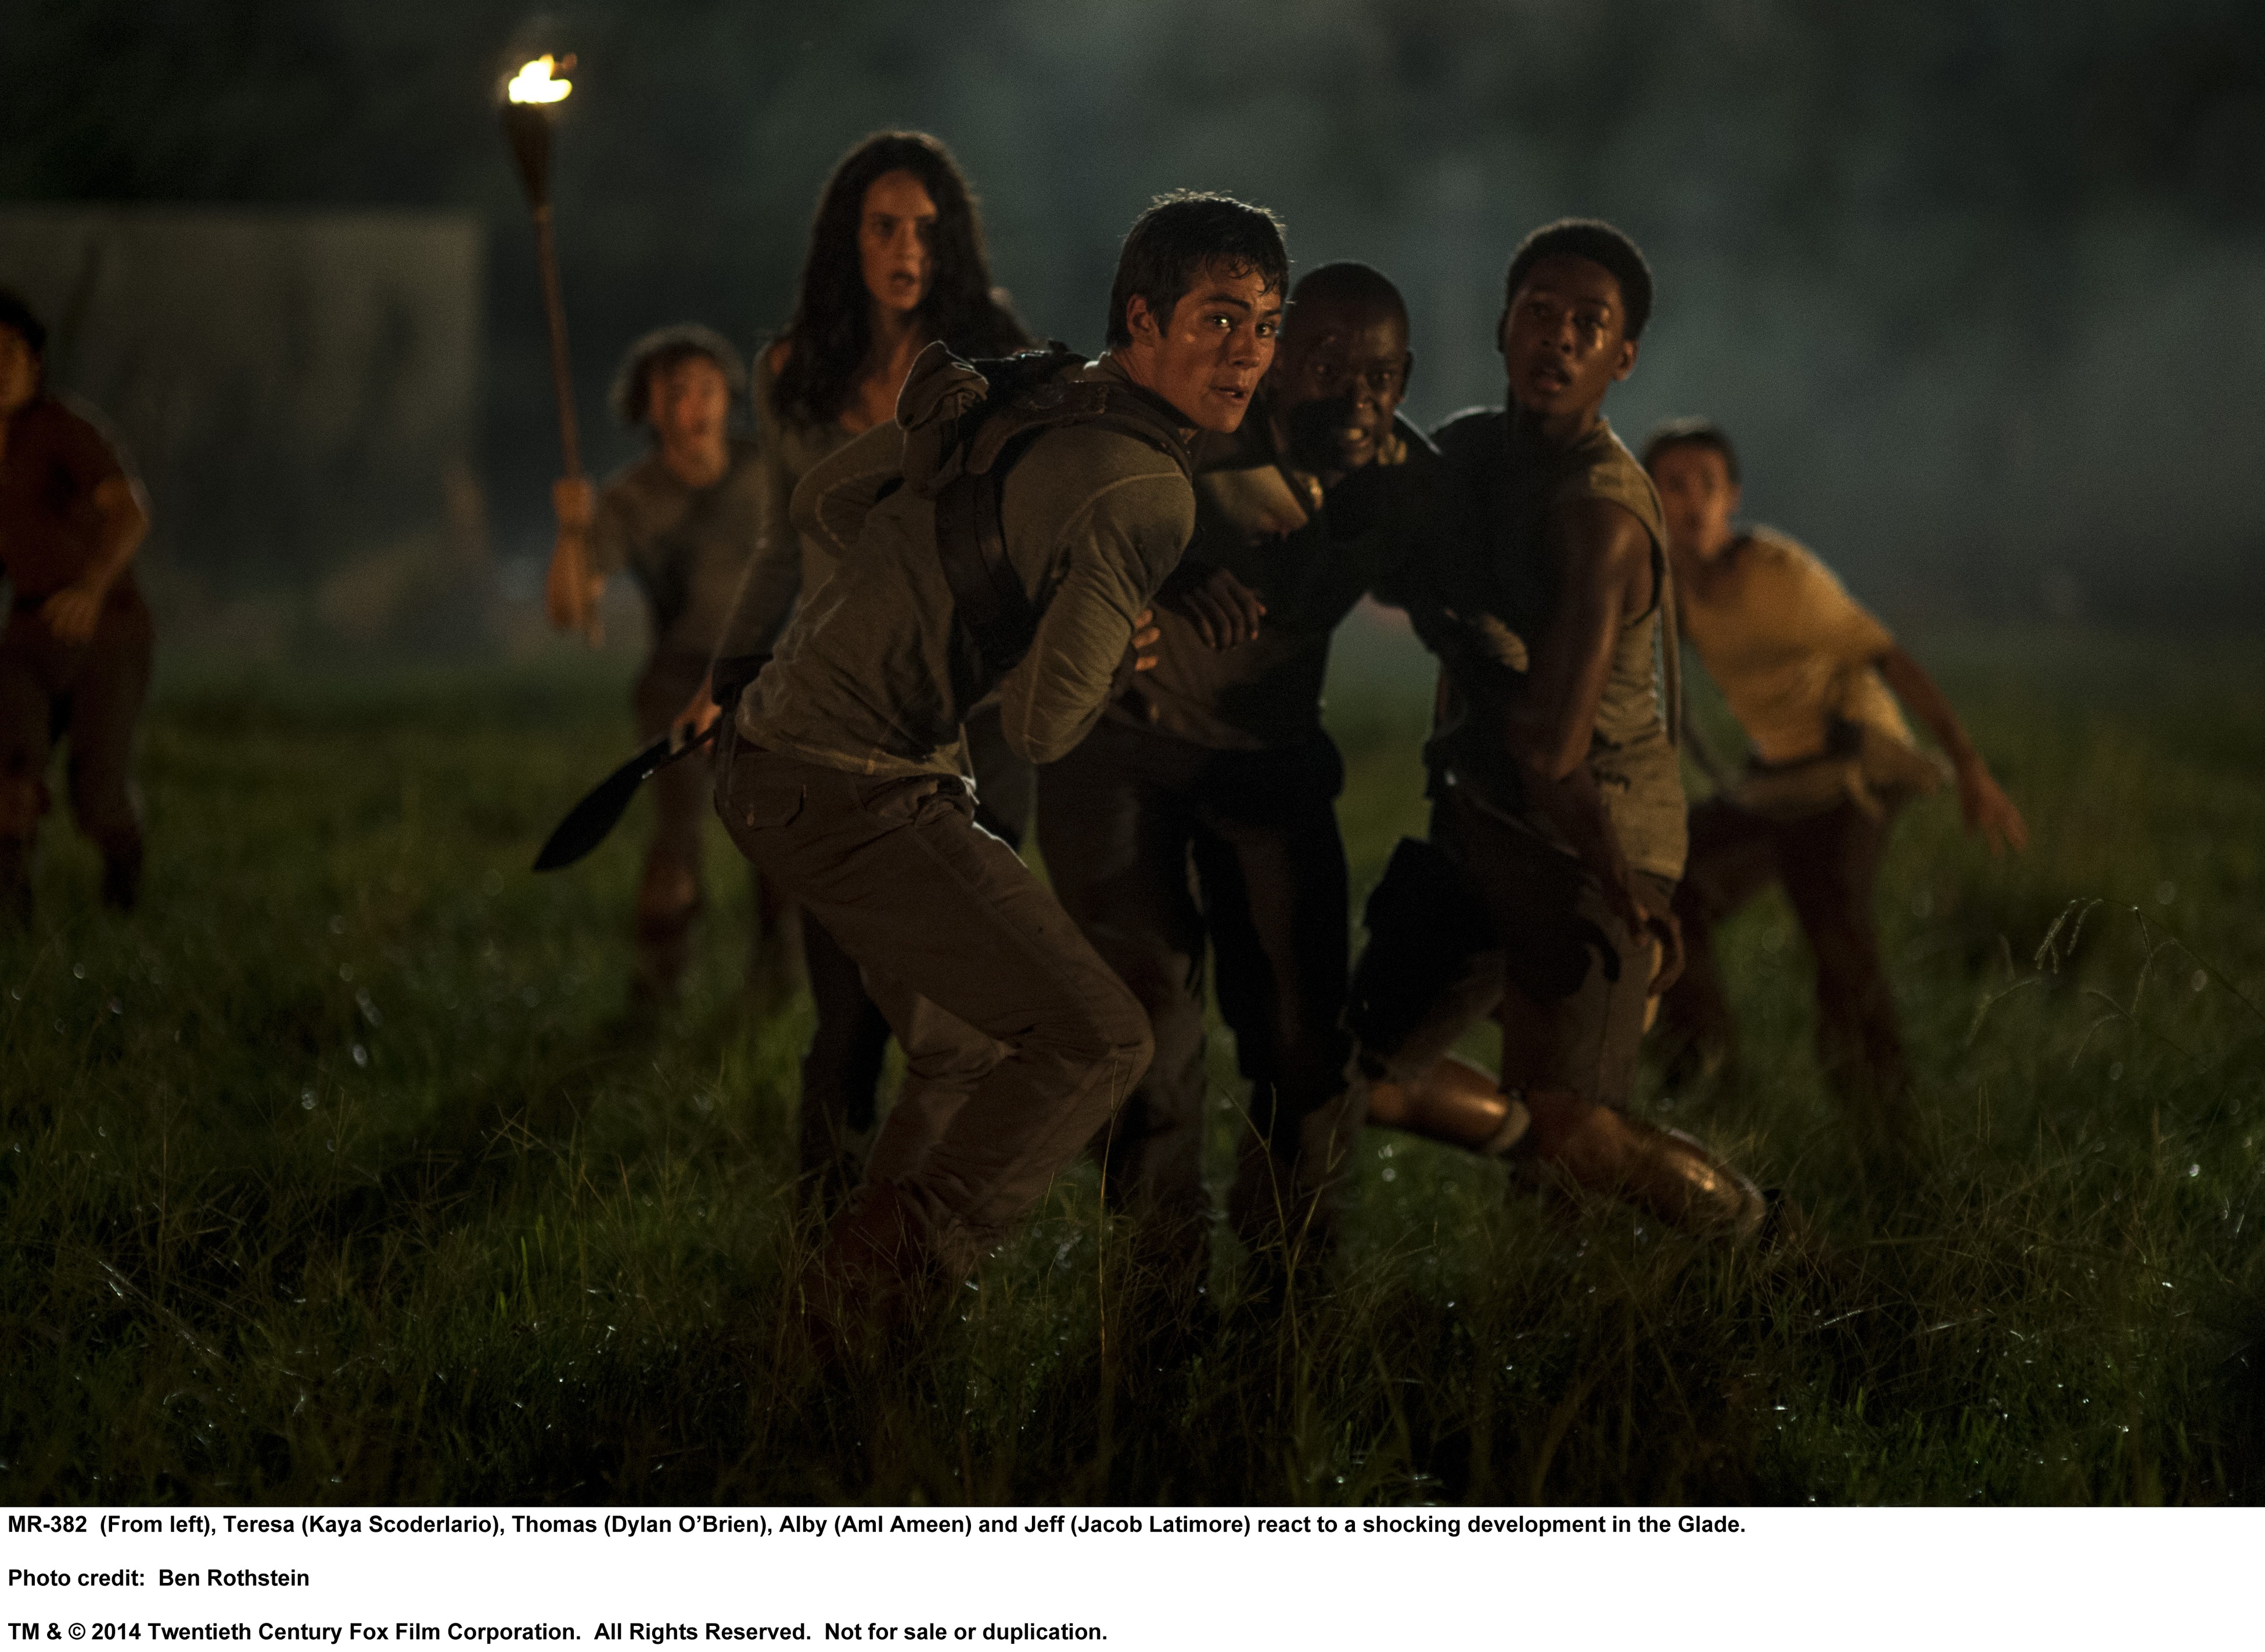 MOVIE Coming Soon: 'THE MAZE RUNNER' [2014] Watch Trailer Now.